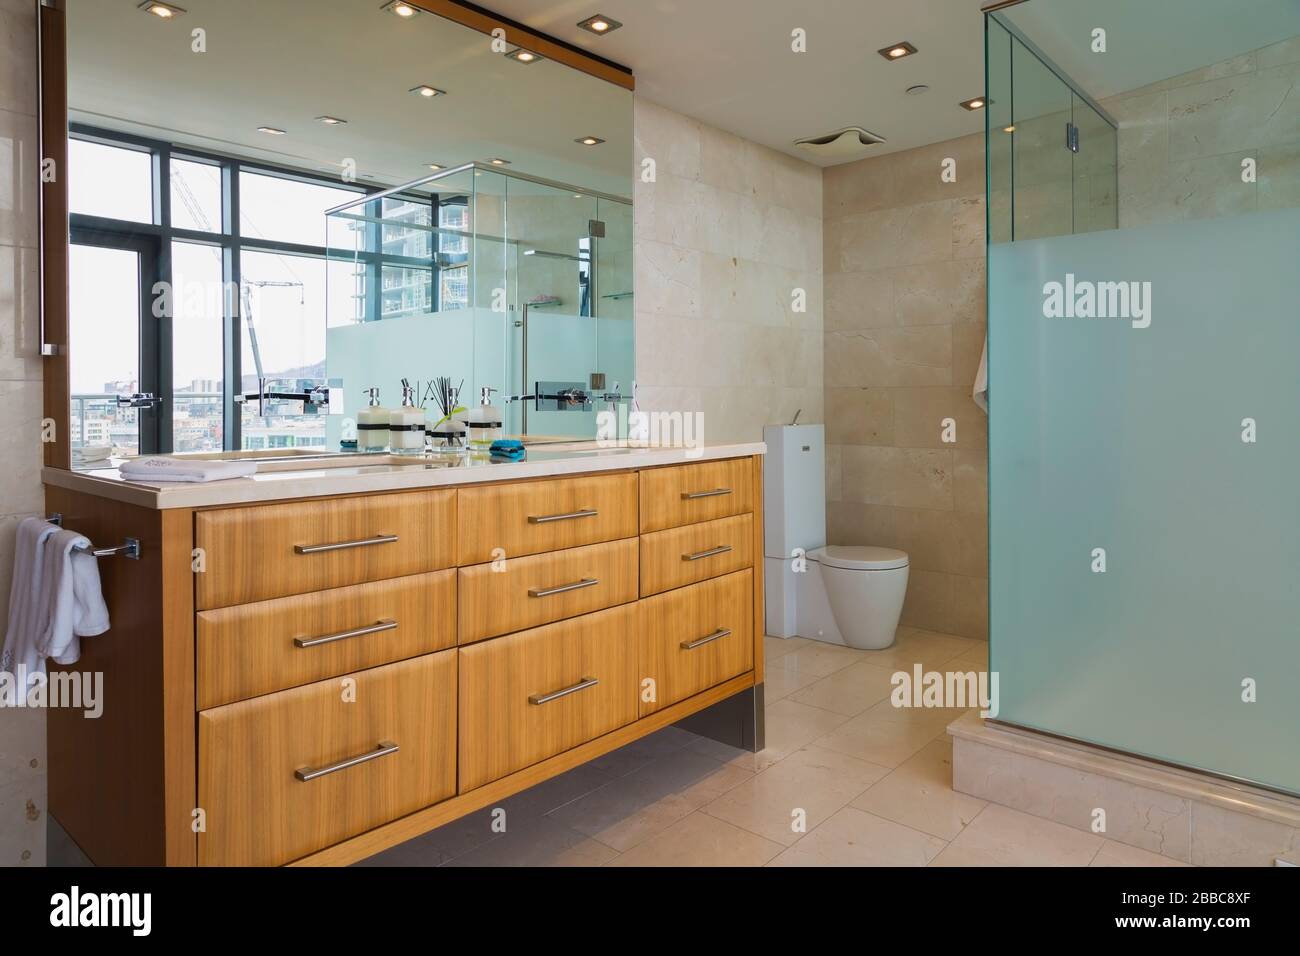 Exotic wood vanity and glass shower stall in en suite with marble tile floor inside a modern luxurious multistory penthouse condominium unit, Old Montreal, Quebec, Canada. This image is property released for publication in calendars and editorial use. EUPR0359 Stock Photo